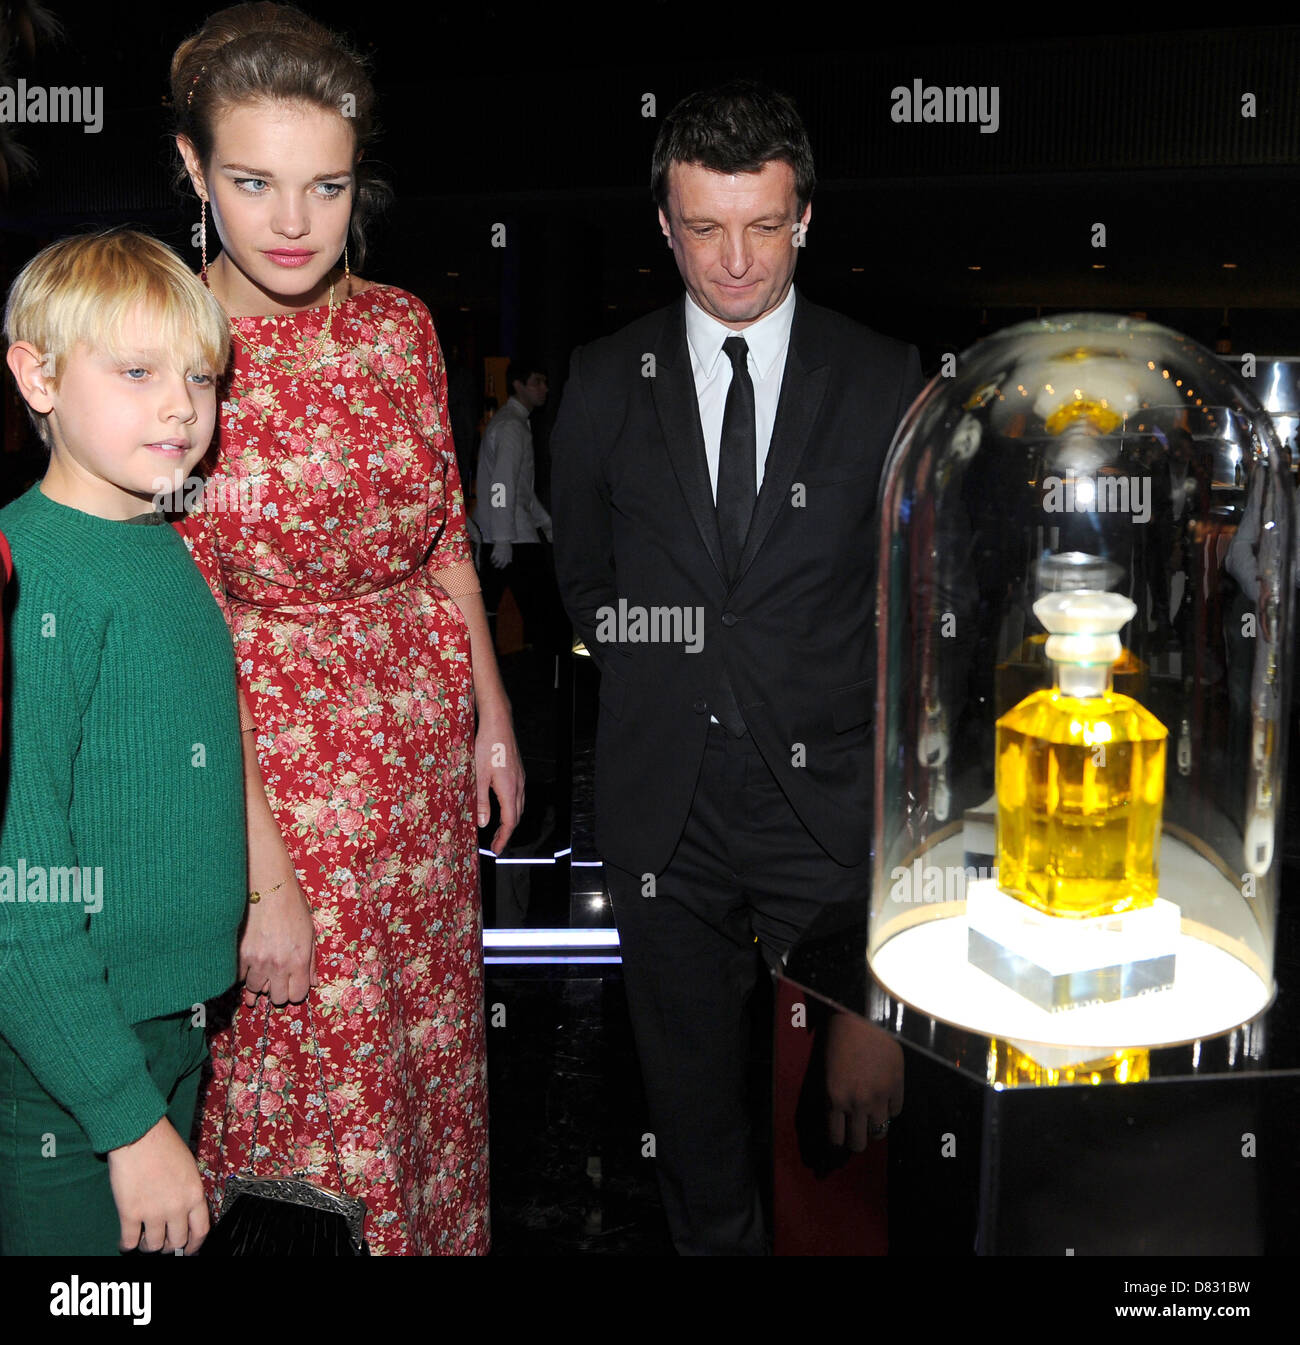 LVMH luxury group CEO Bernard Arnault, center, flanked by his daughter  Delphine Arnault, left, and his son Antoine Arnault as they attend the  opening of the exhibition 'The Morozov Collection, Icons of